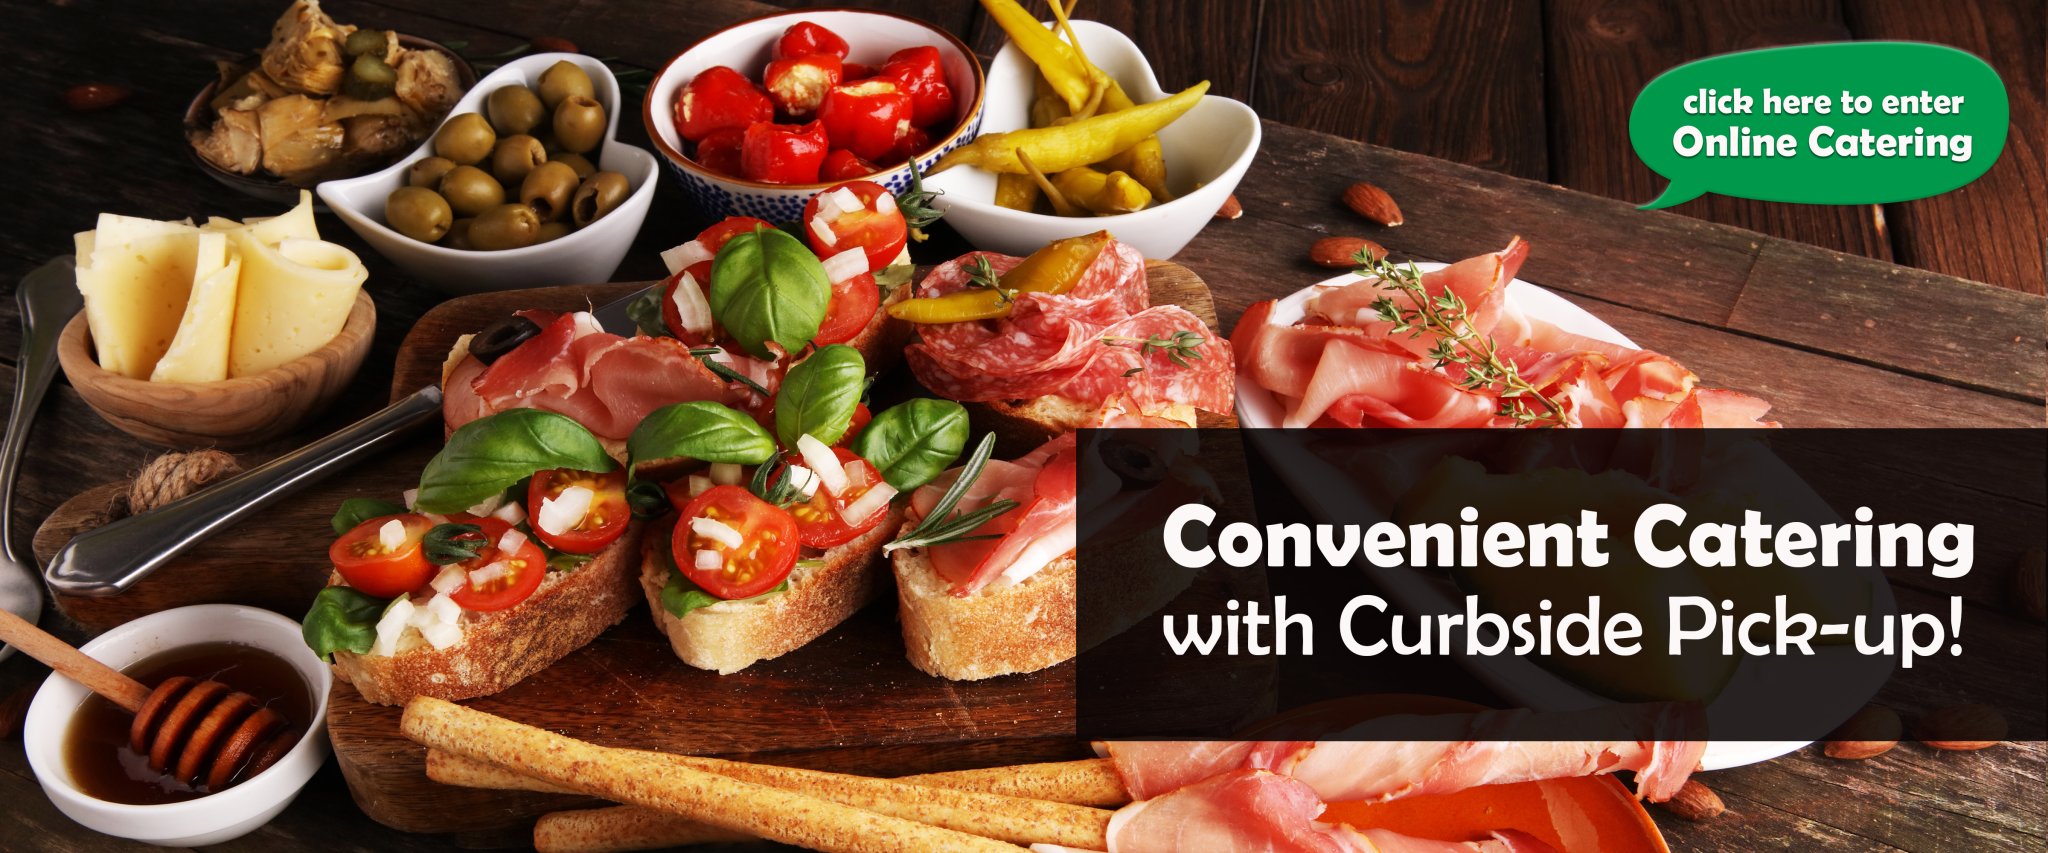 Convenient Catering with Curbside Pick-up! Click here to enter Online Catering.